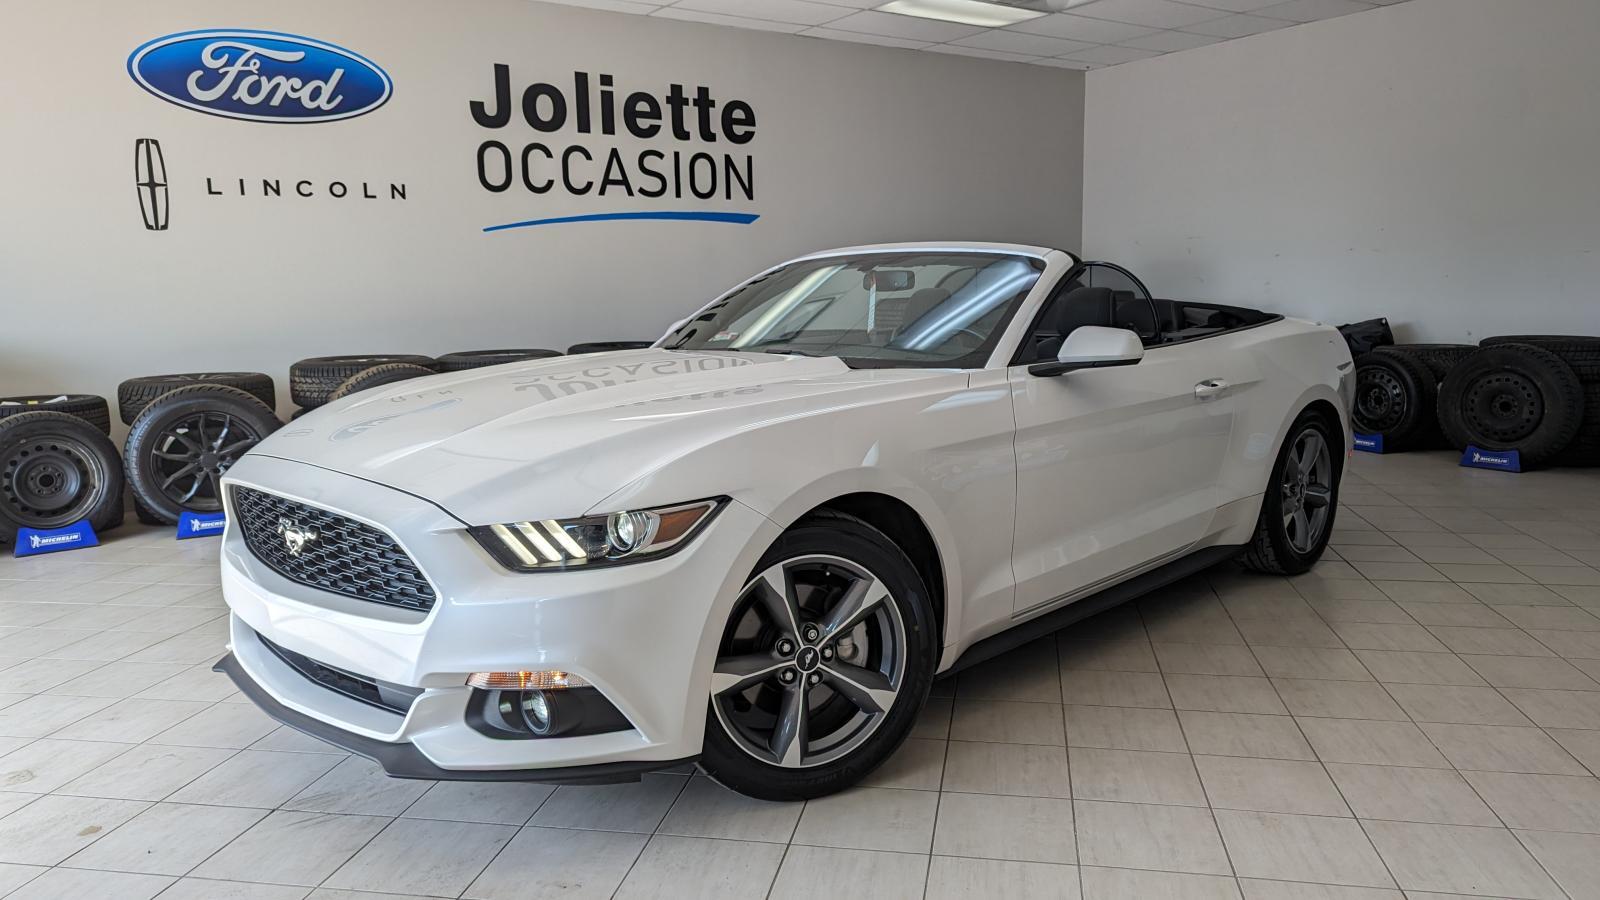 2017 Ford Mustang CONVERTIBLE V6 AUTOMATIQUE MAGS 18PO TOIT TUSSU